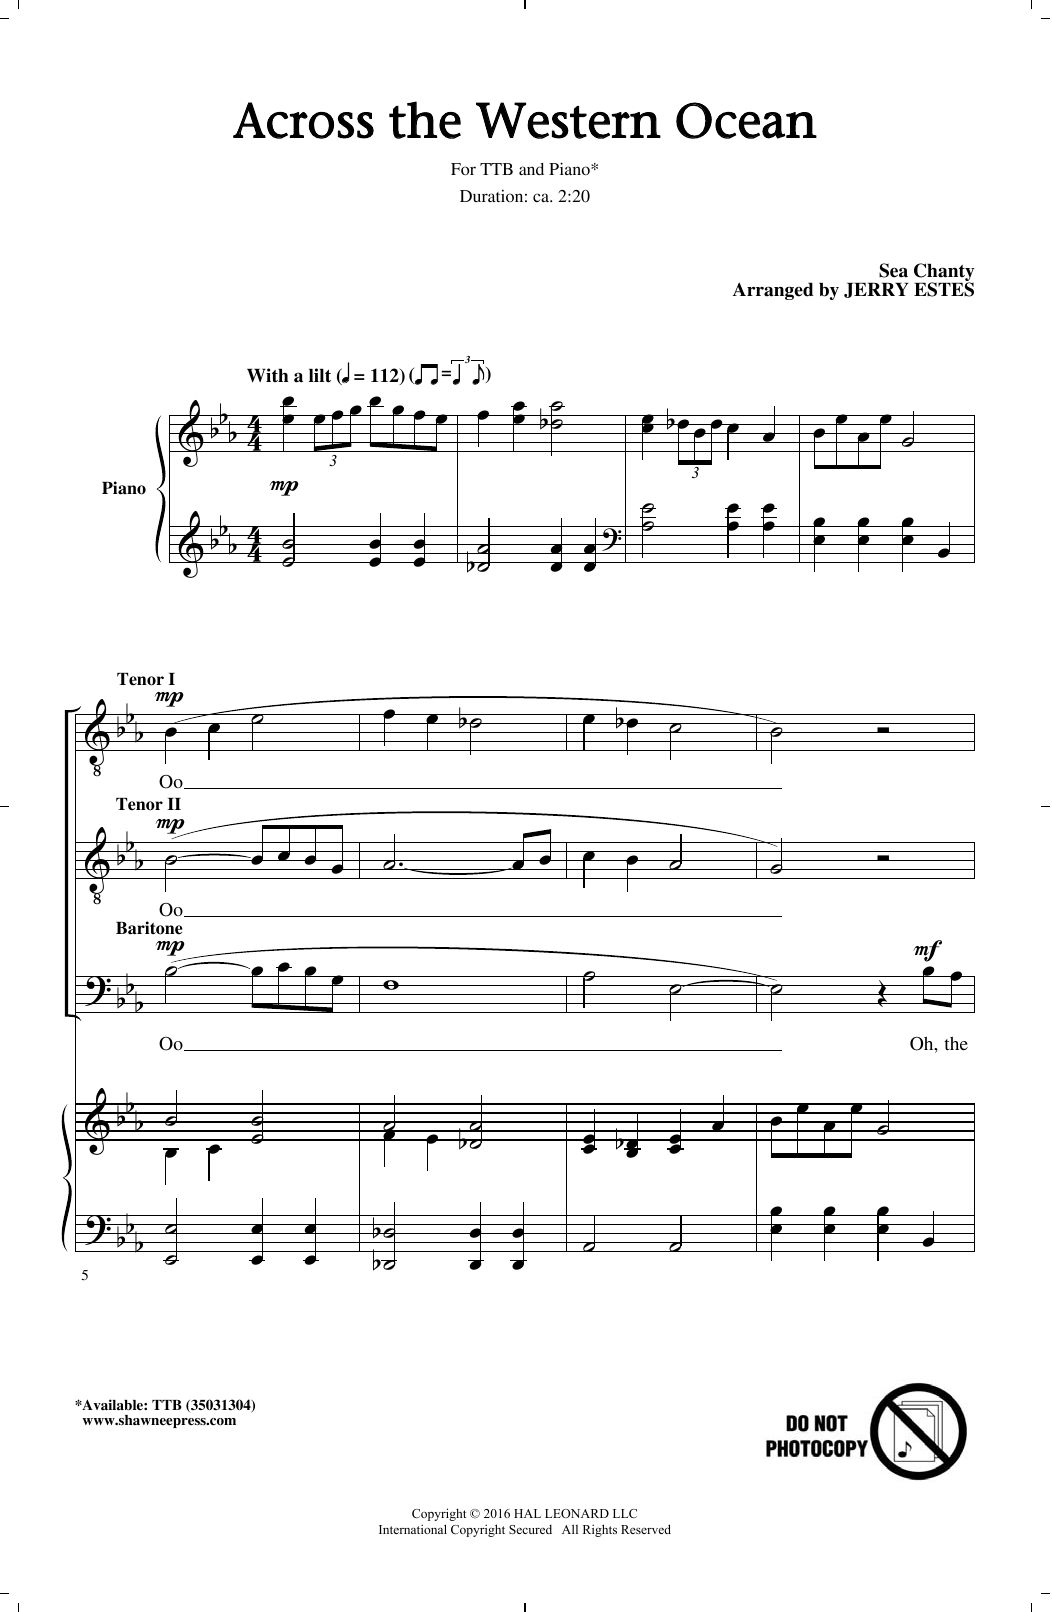 Jerry Estes Across The Western Ocean sheet music notes and chords. Download Printable PDF.